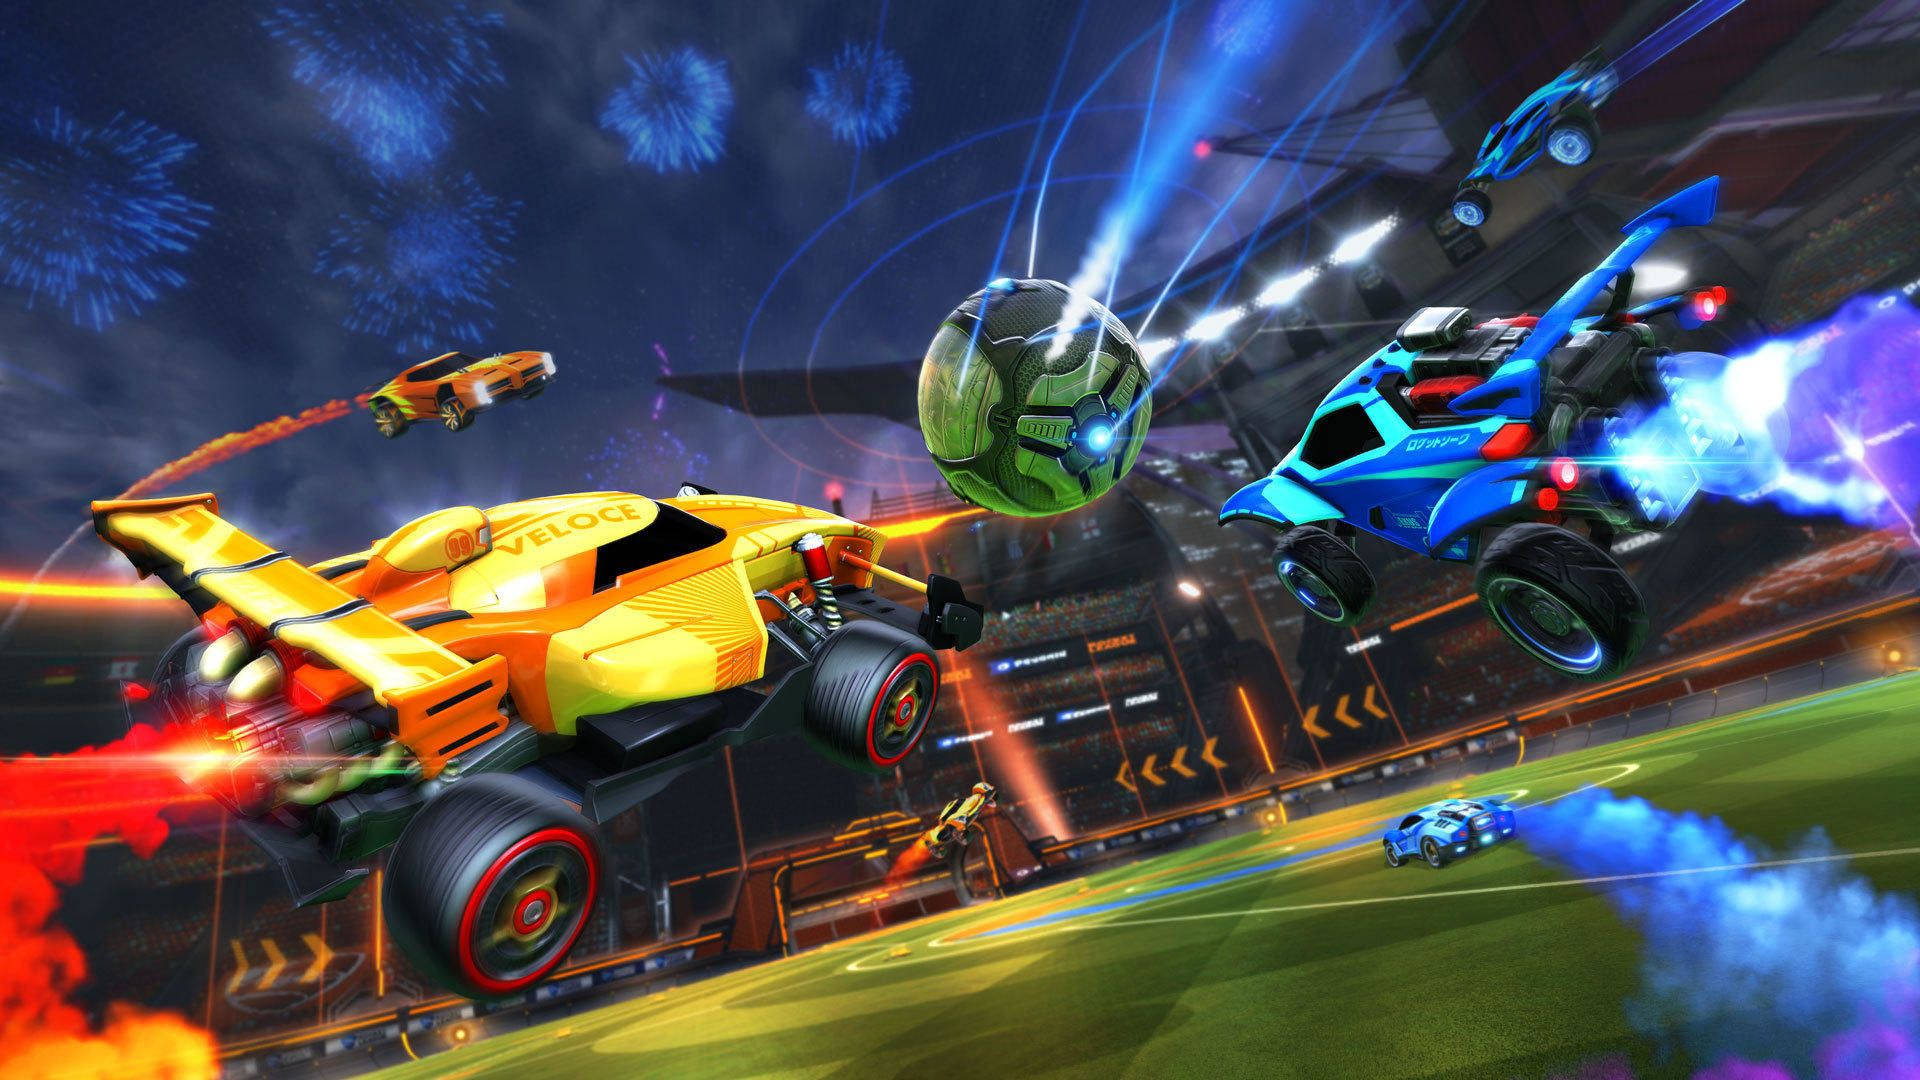 Play The Most Exciting Rocket League Game in HD Wallpaper